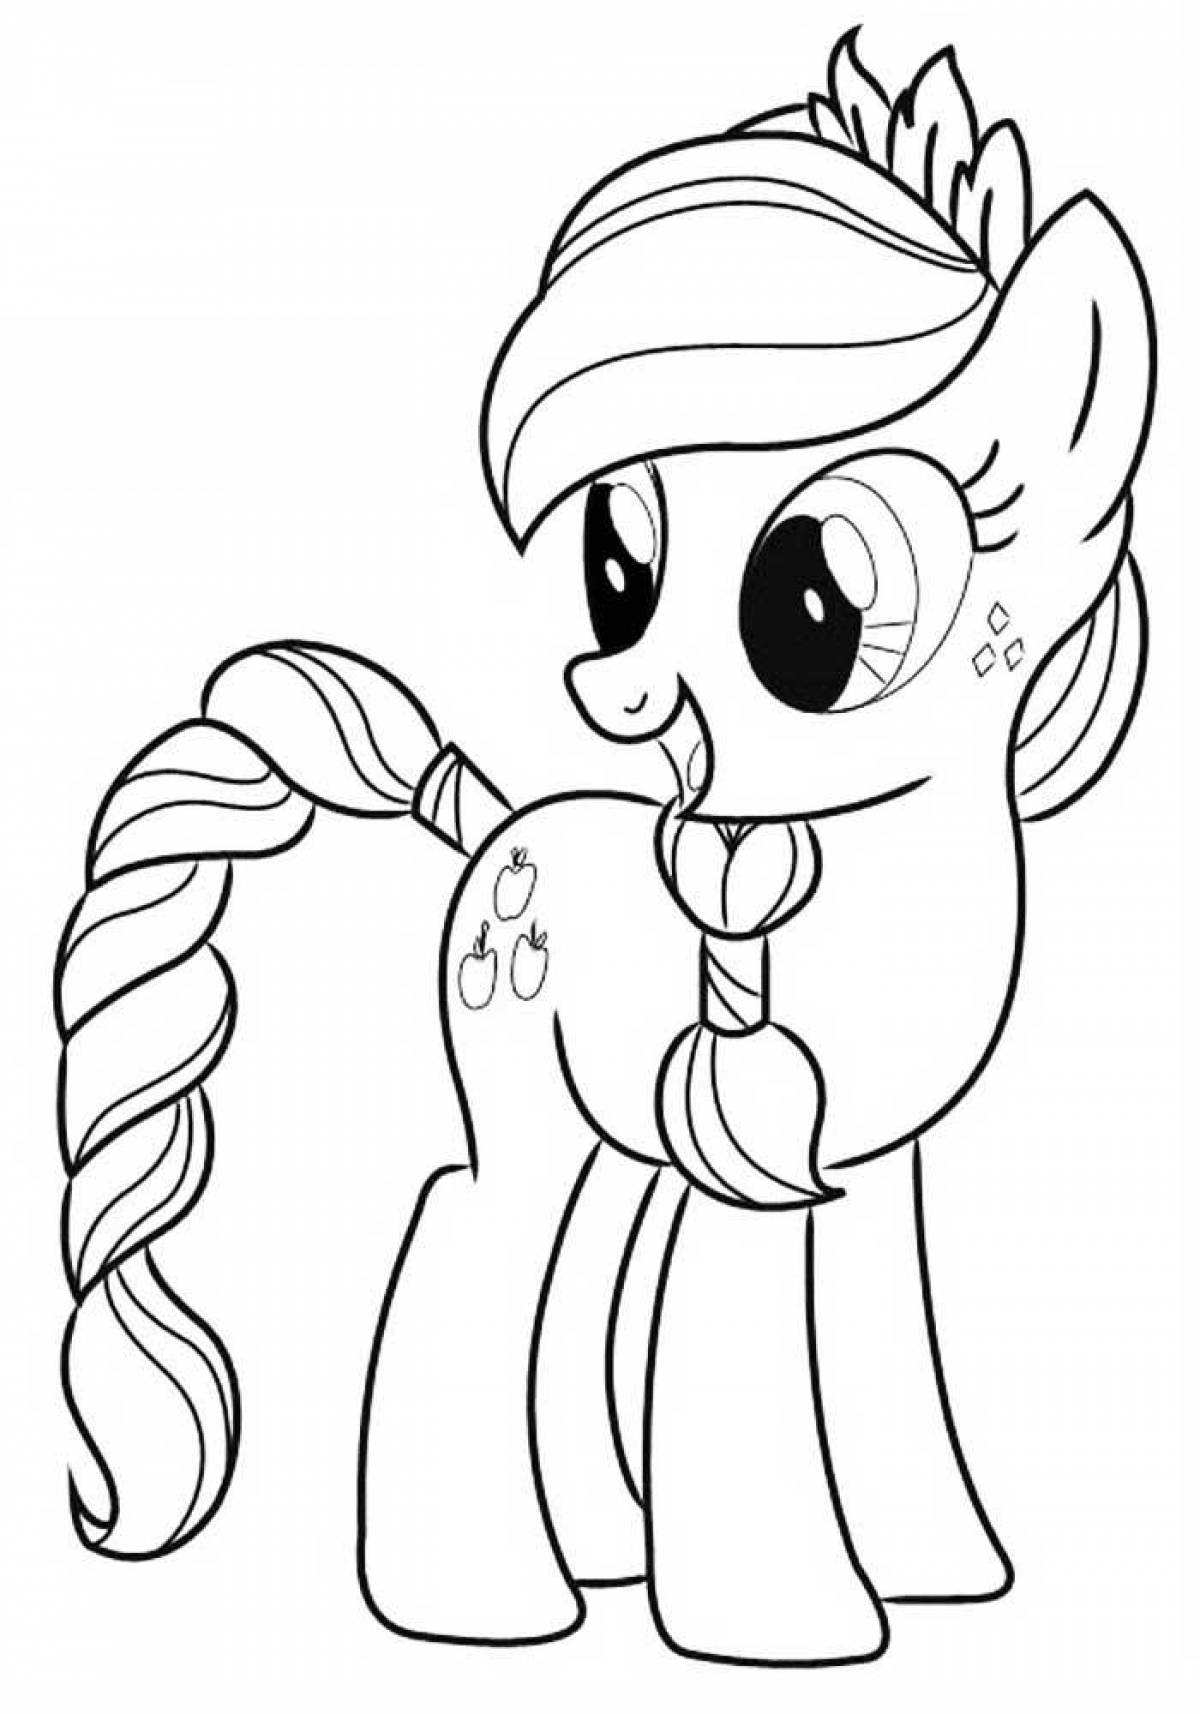 Great pony coloring book for kids